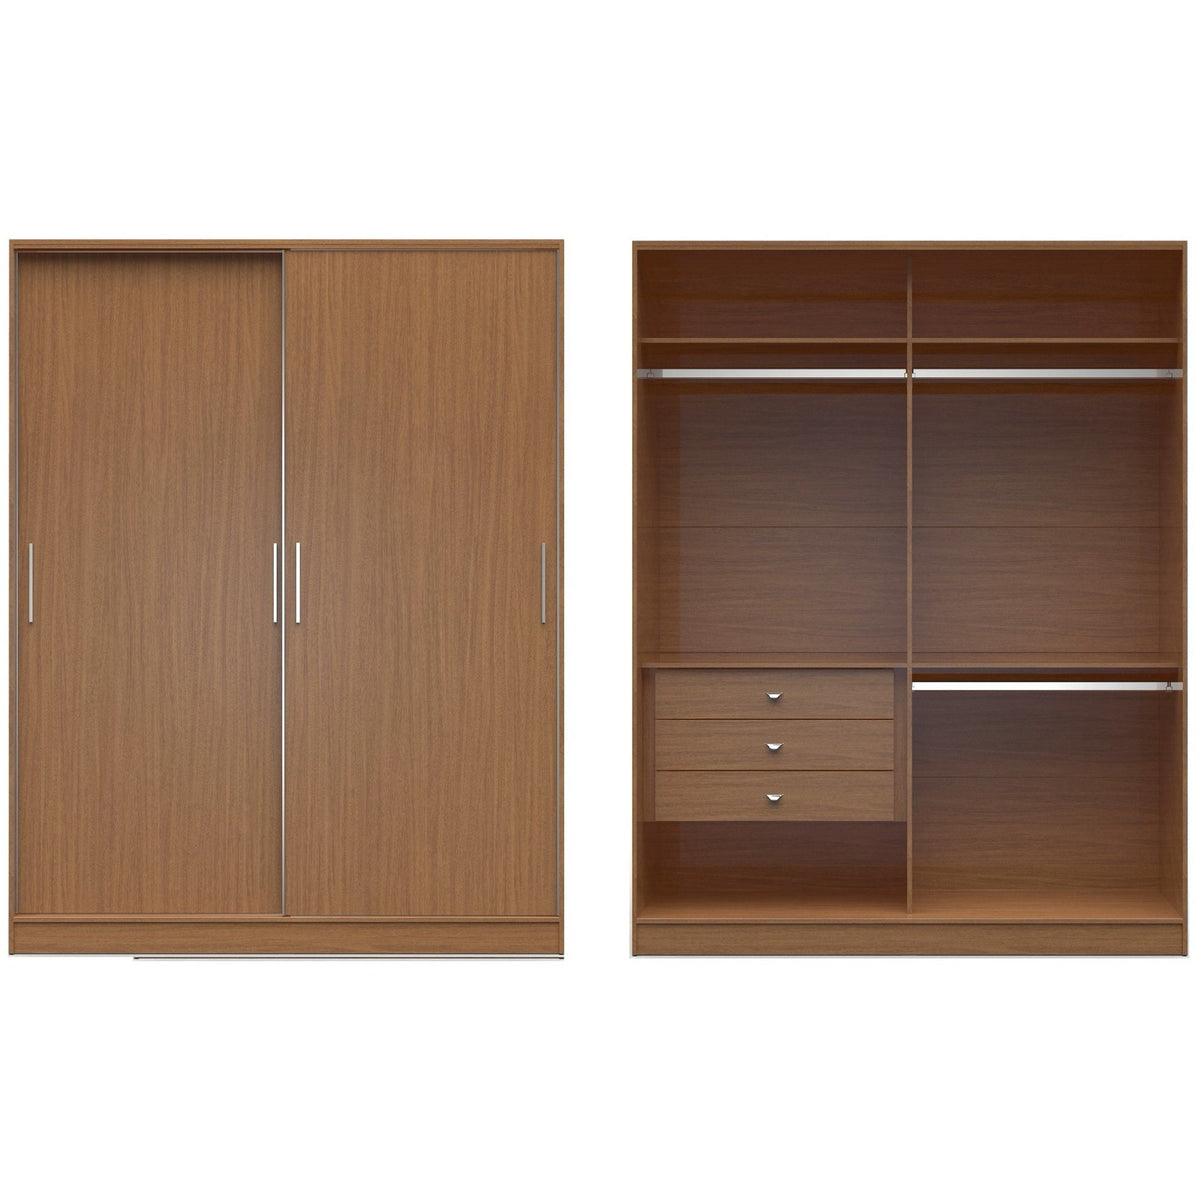 Manhattan Comfort Chelsea 2.0 - 70.07 inch Wide Double Basic Wardrobe with 3 Drawers and 2 Sliding Doors in Maple Cream-Minimal & Modern